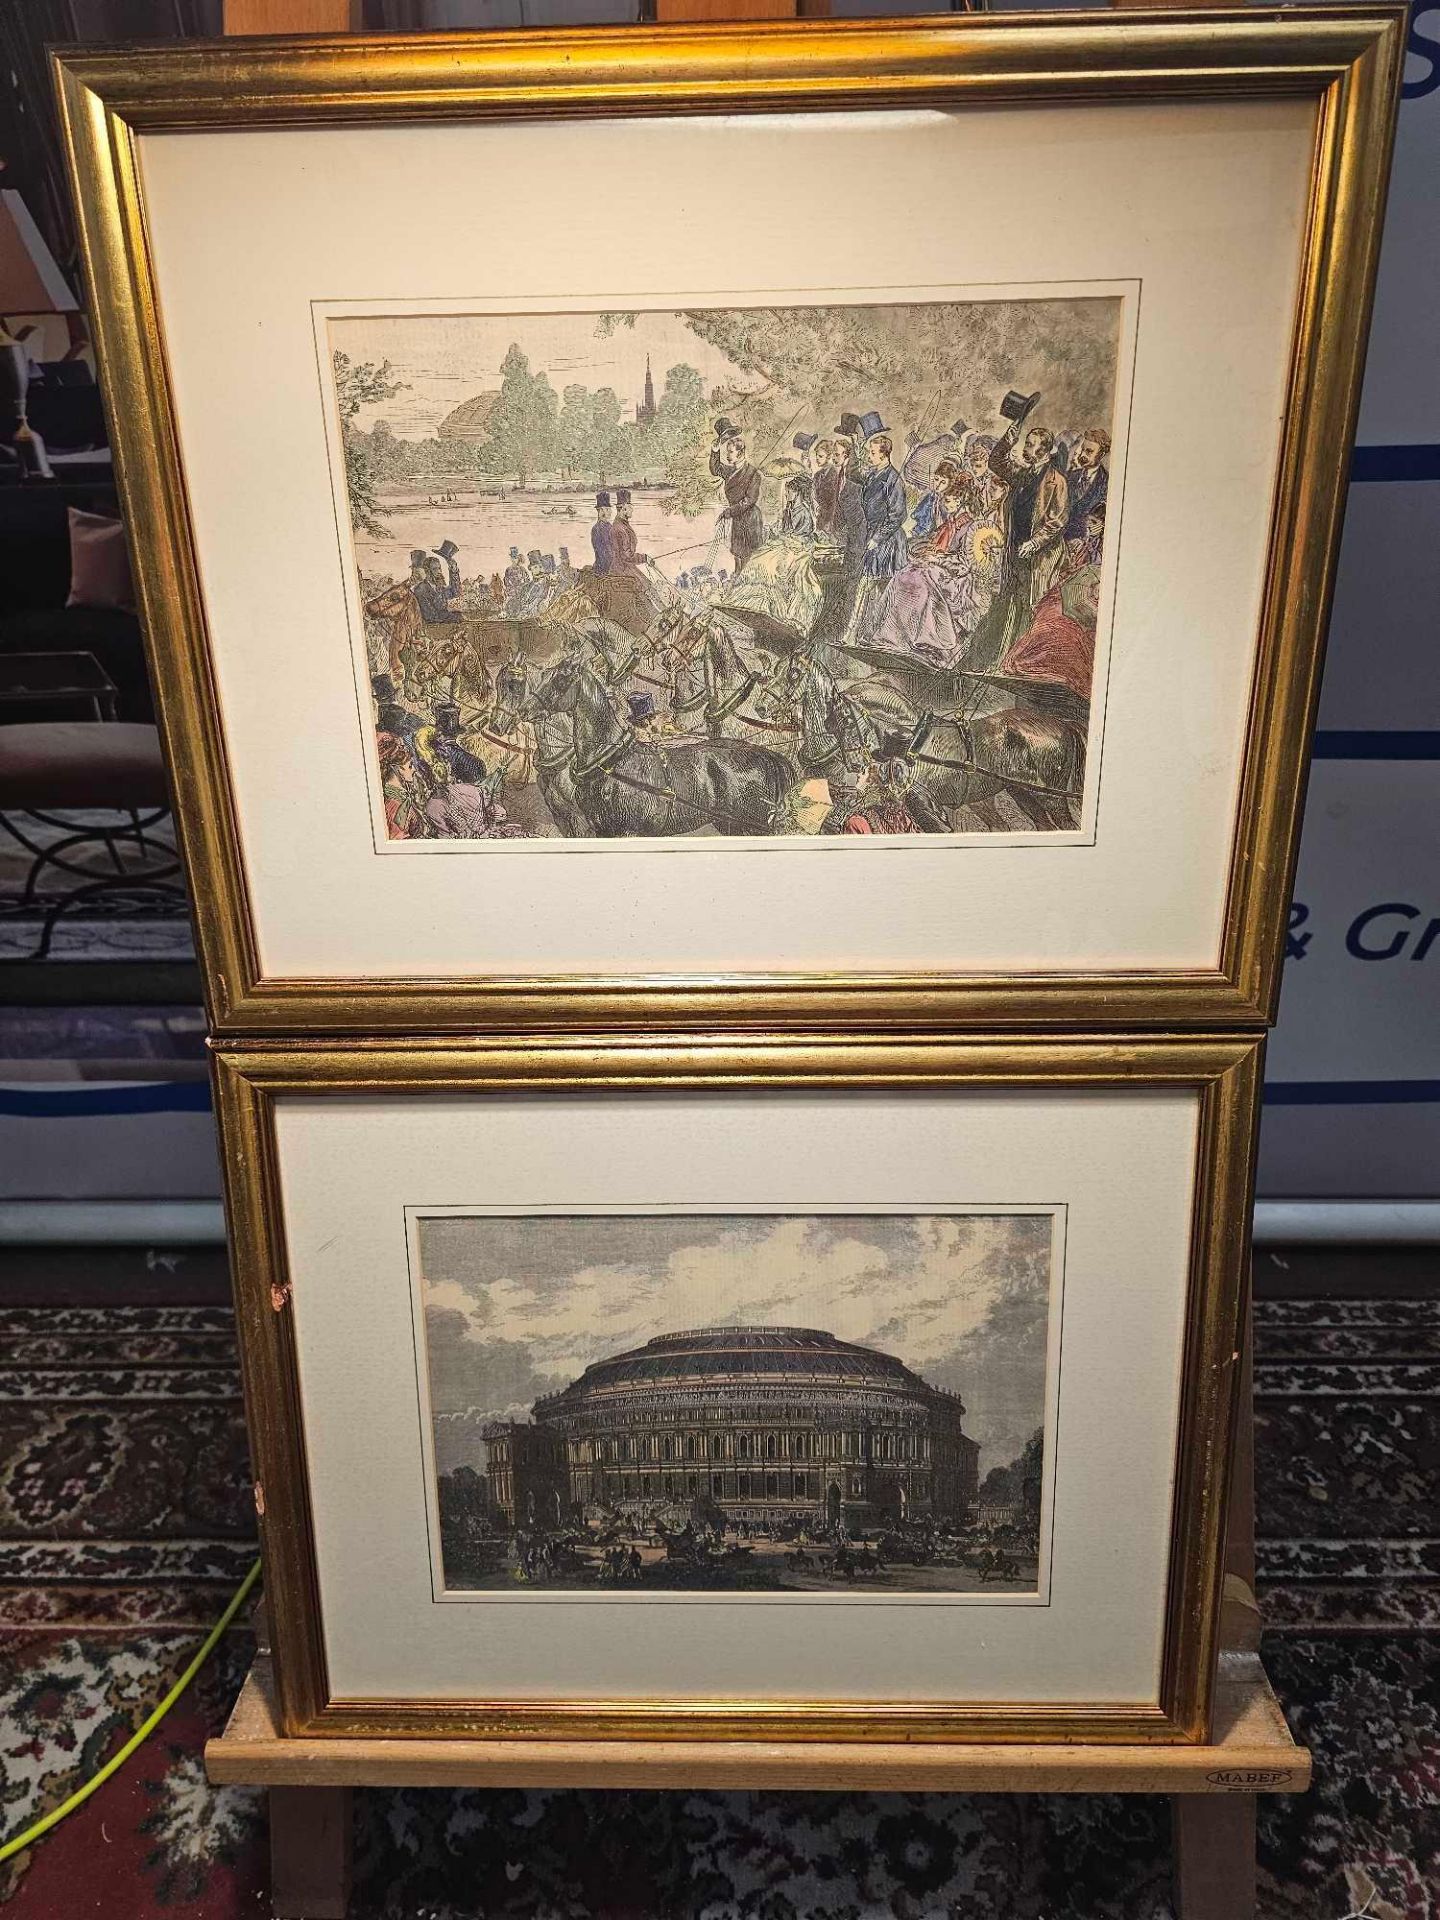 2 x Framed Prints (1) The Central Hall of Arts And Sciences, To Be Erected At Kensington.